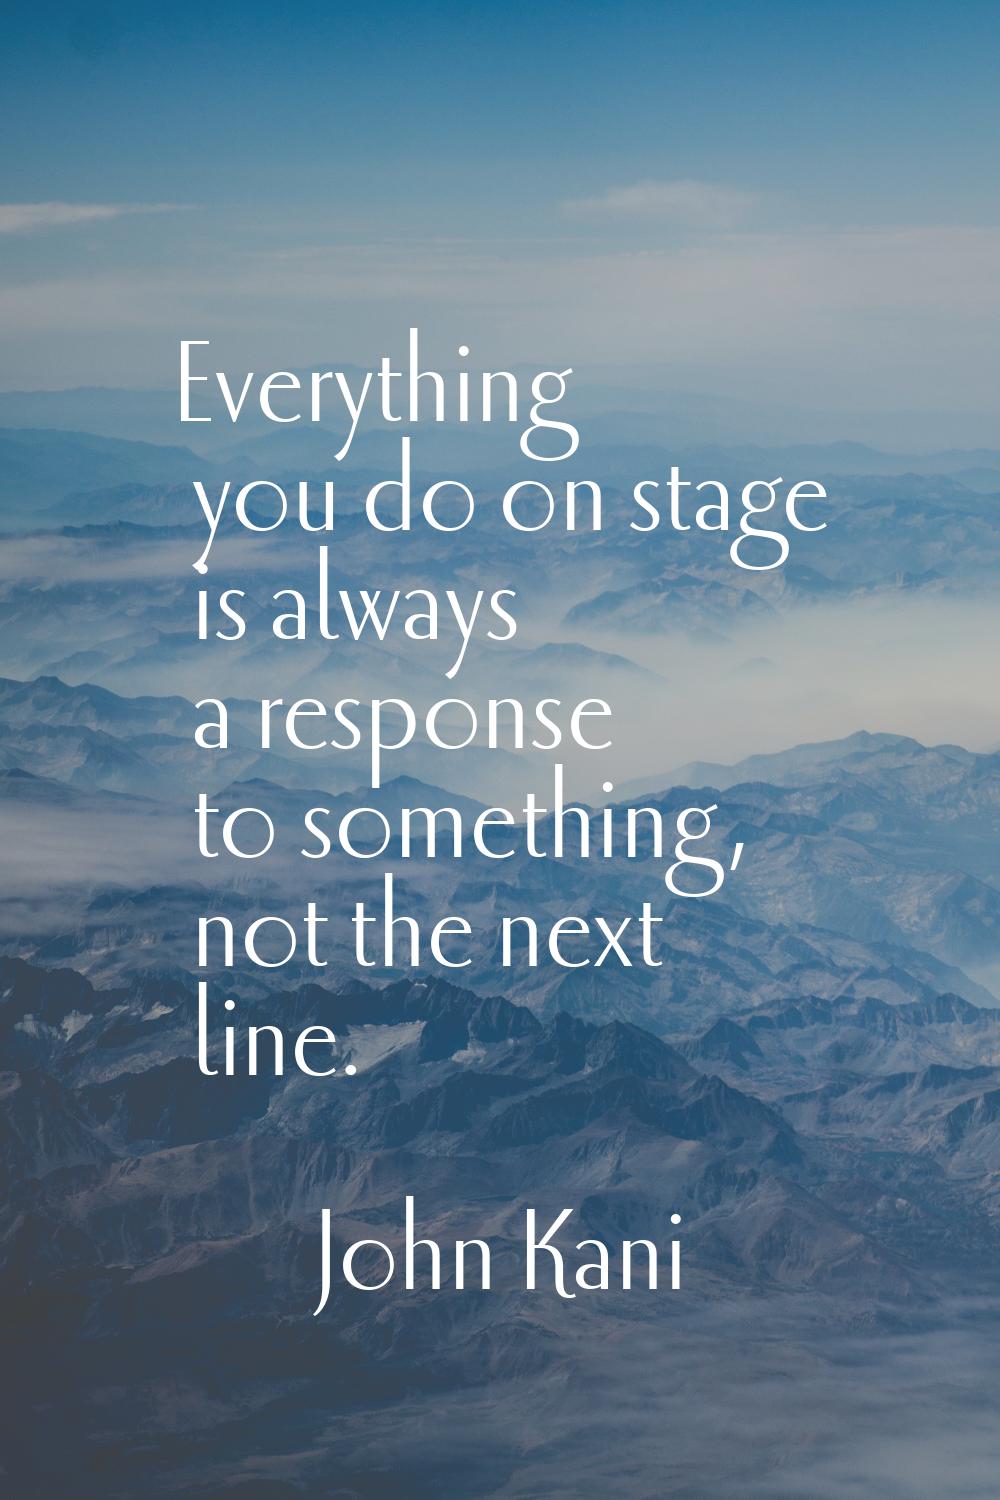 Everything you do on stage is always a response to something, not the next line.